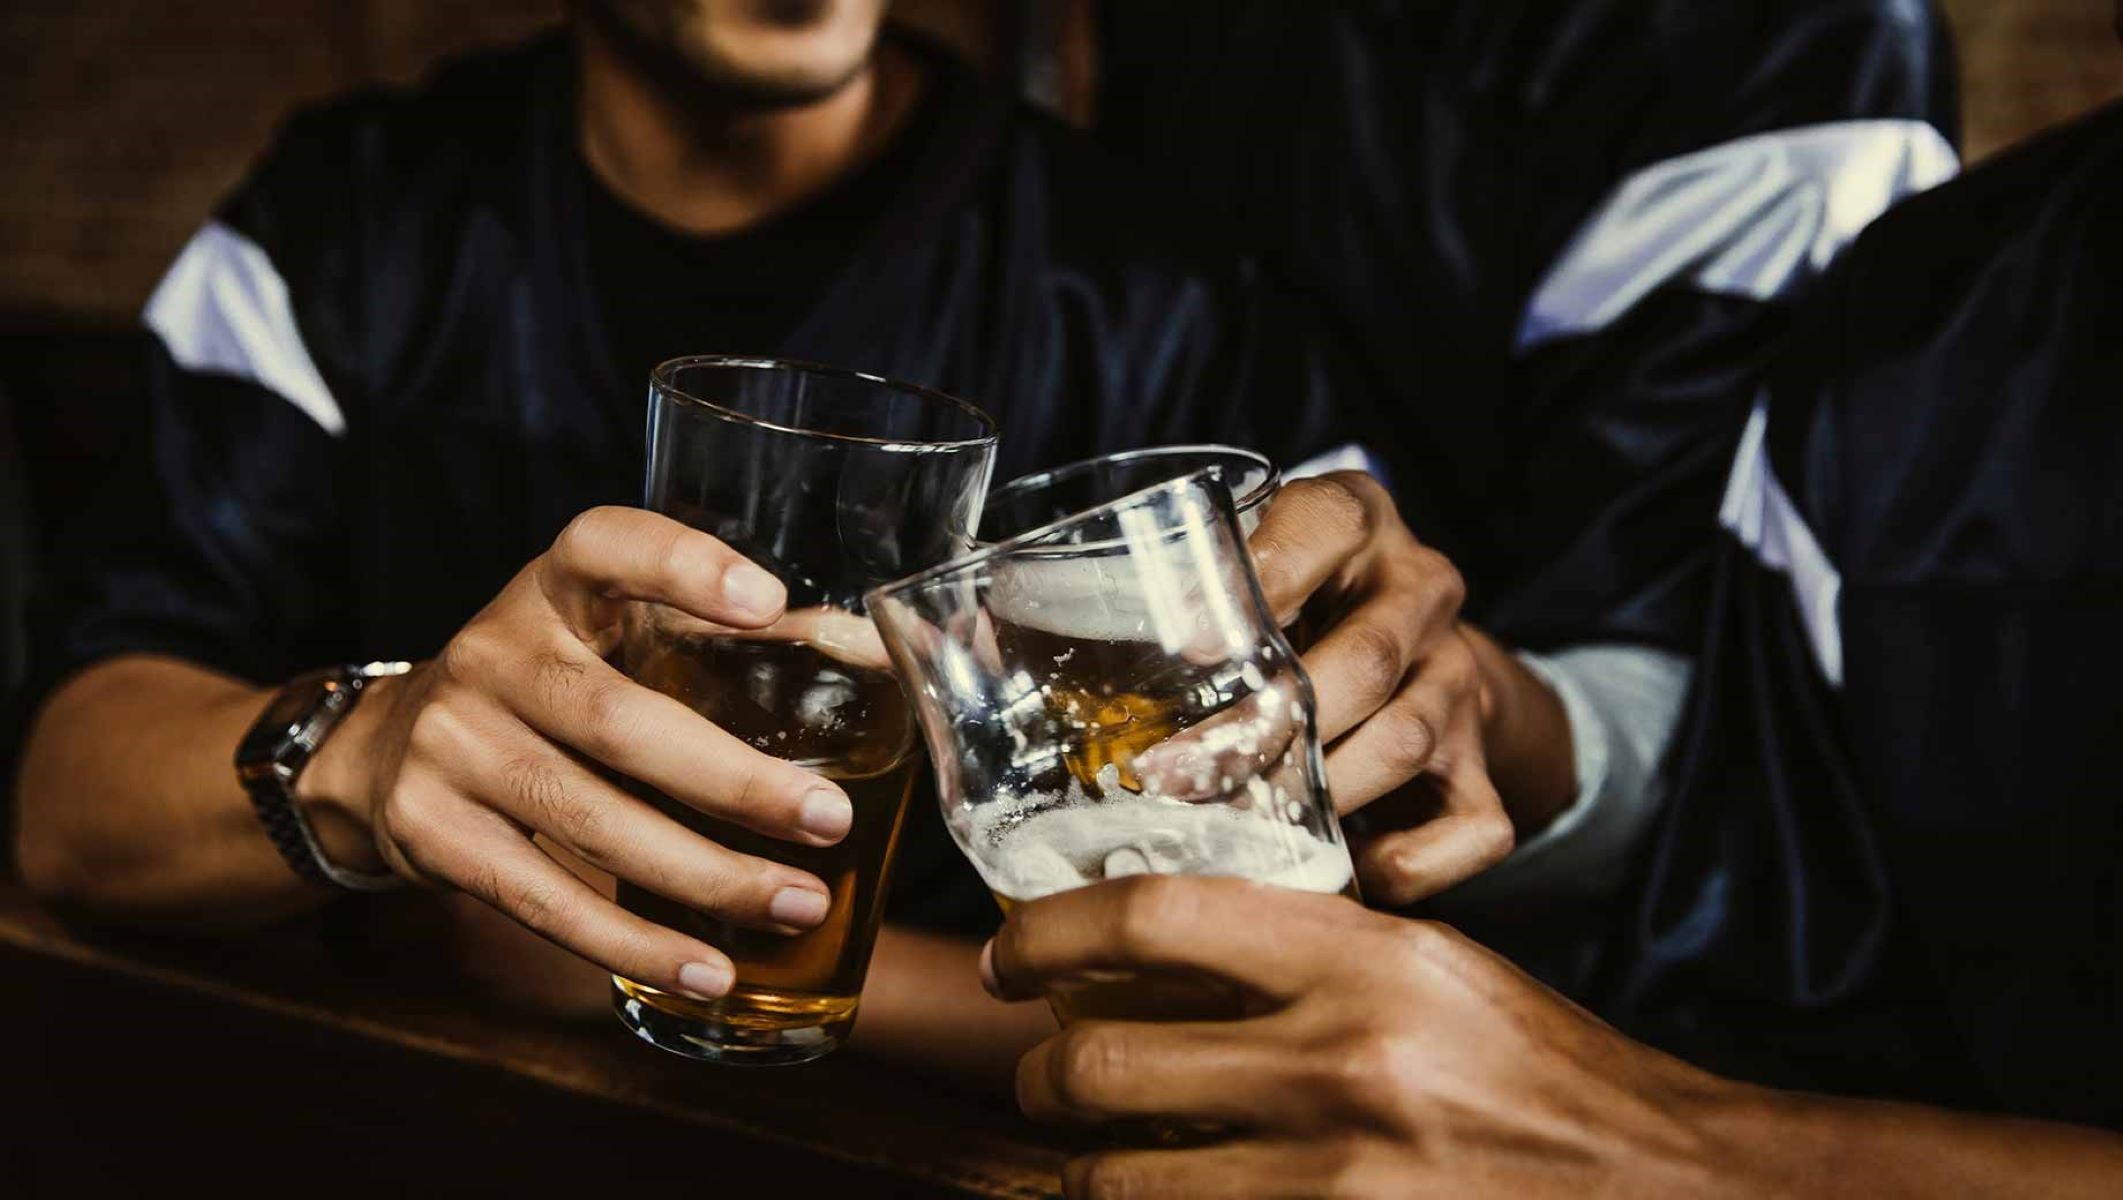 When Should You Cease Alcohol Consumption Before A Race?